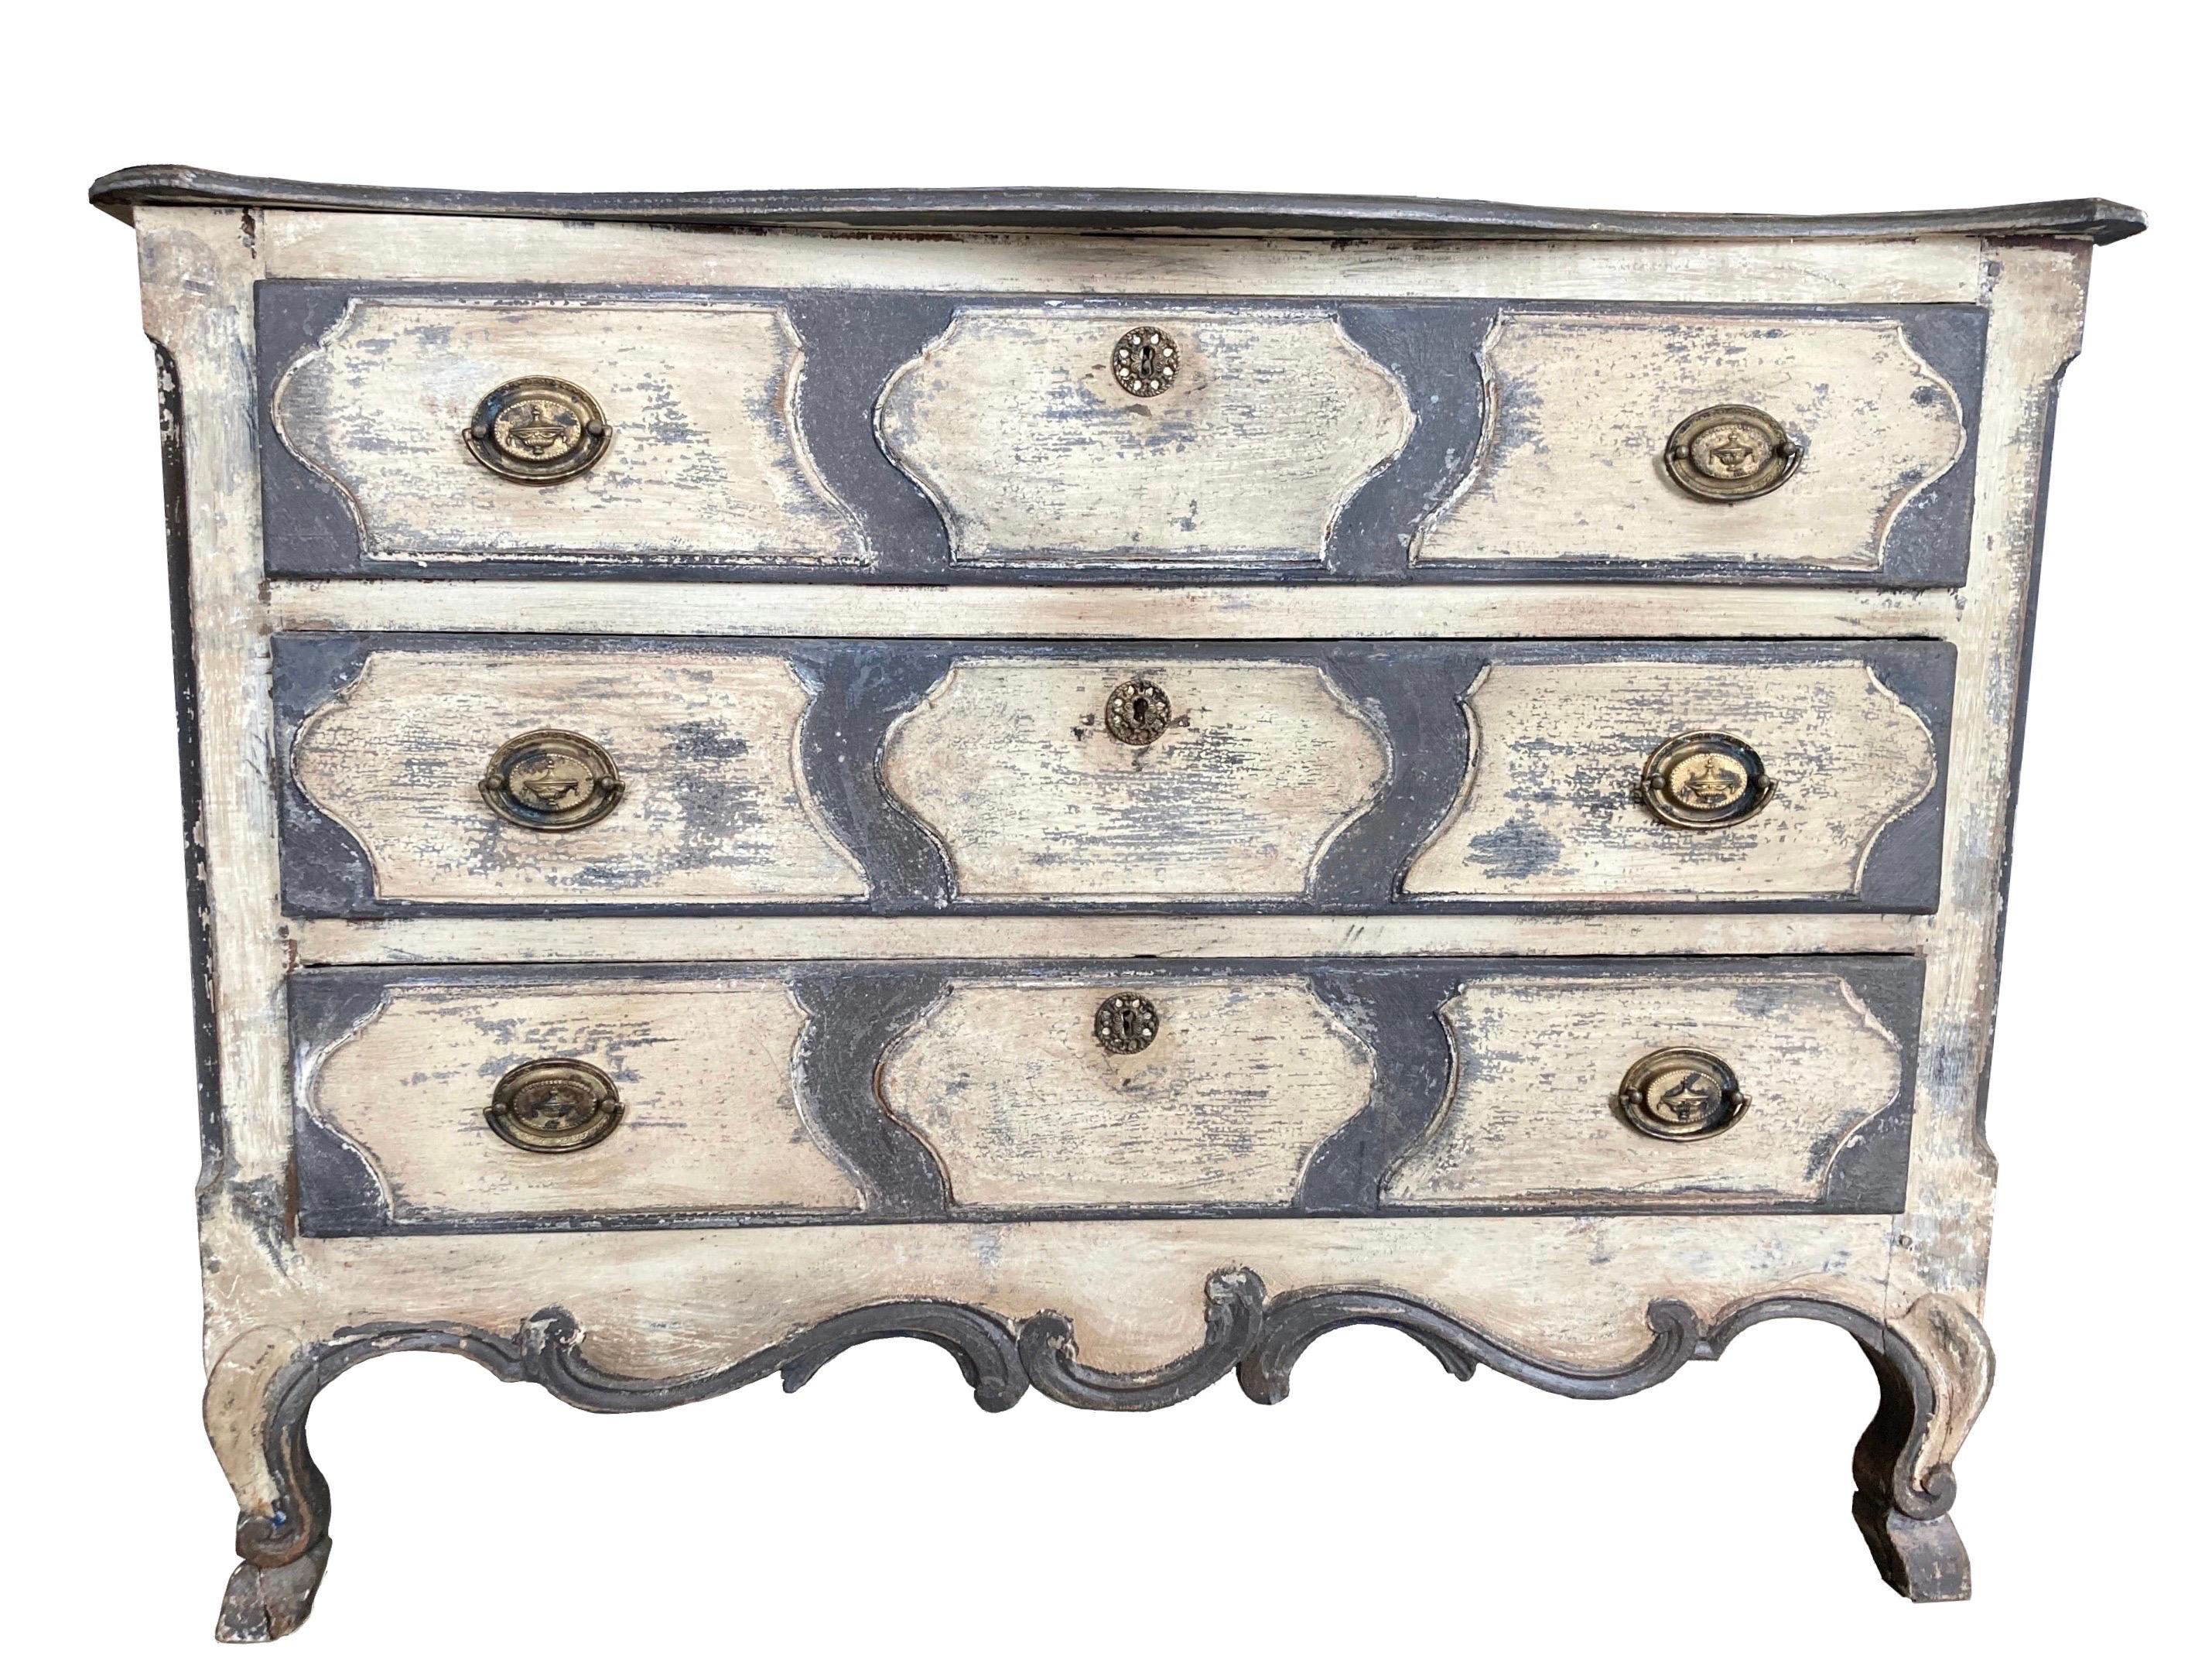 Louis XV commode made in France in the mid 1700s using oak and pegged construction. The chest features three overlay large drawers decorated on the front with raised, symmetrical hand carvings. The top is made of three boards with rounded edges and